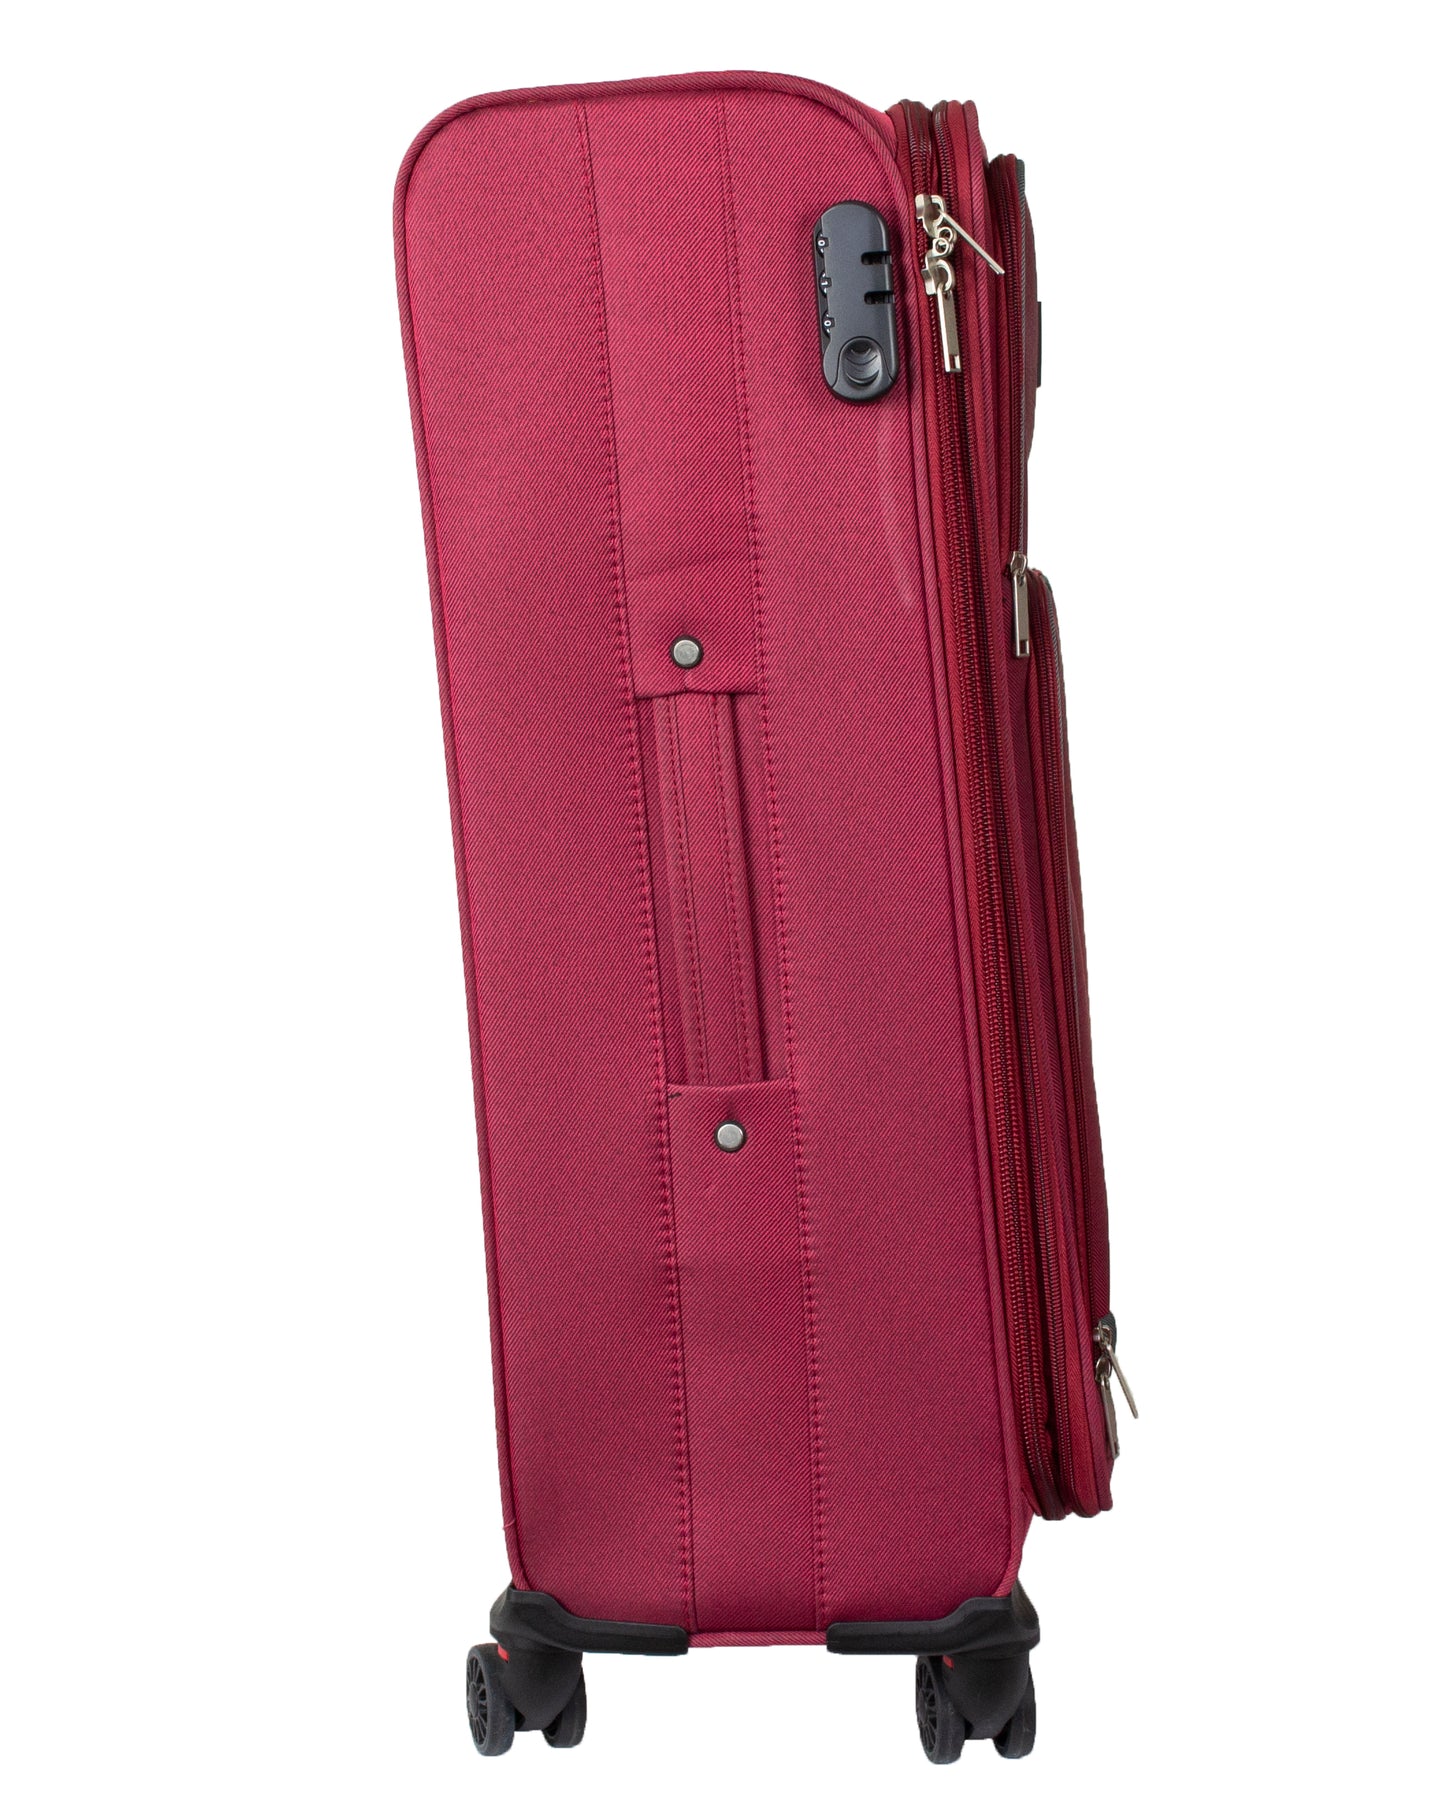 4 Wheels Soft Case Luggage Red